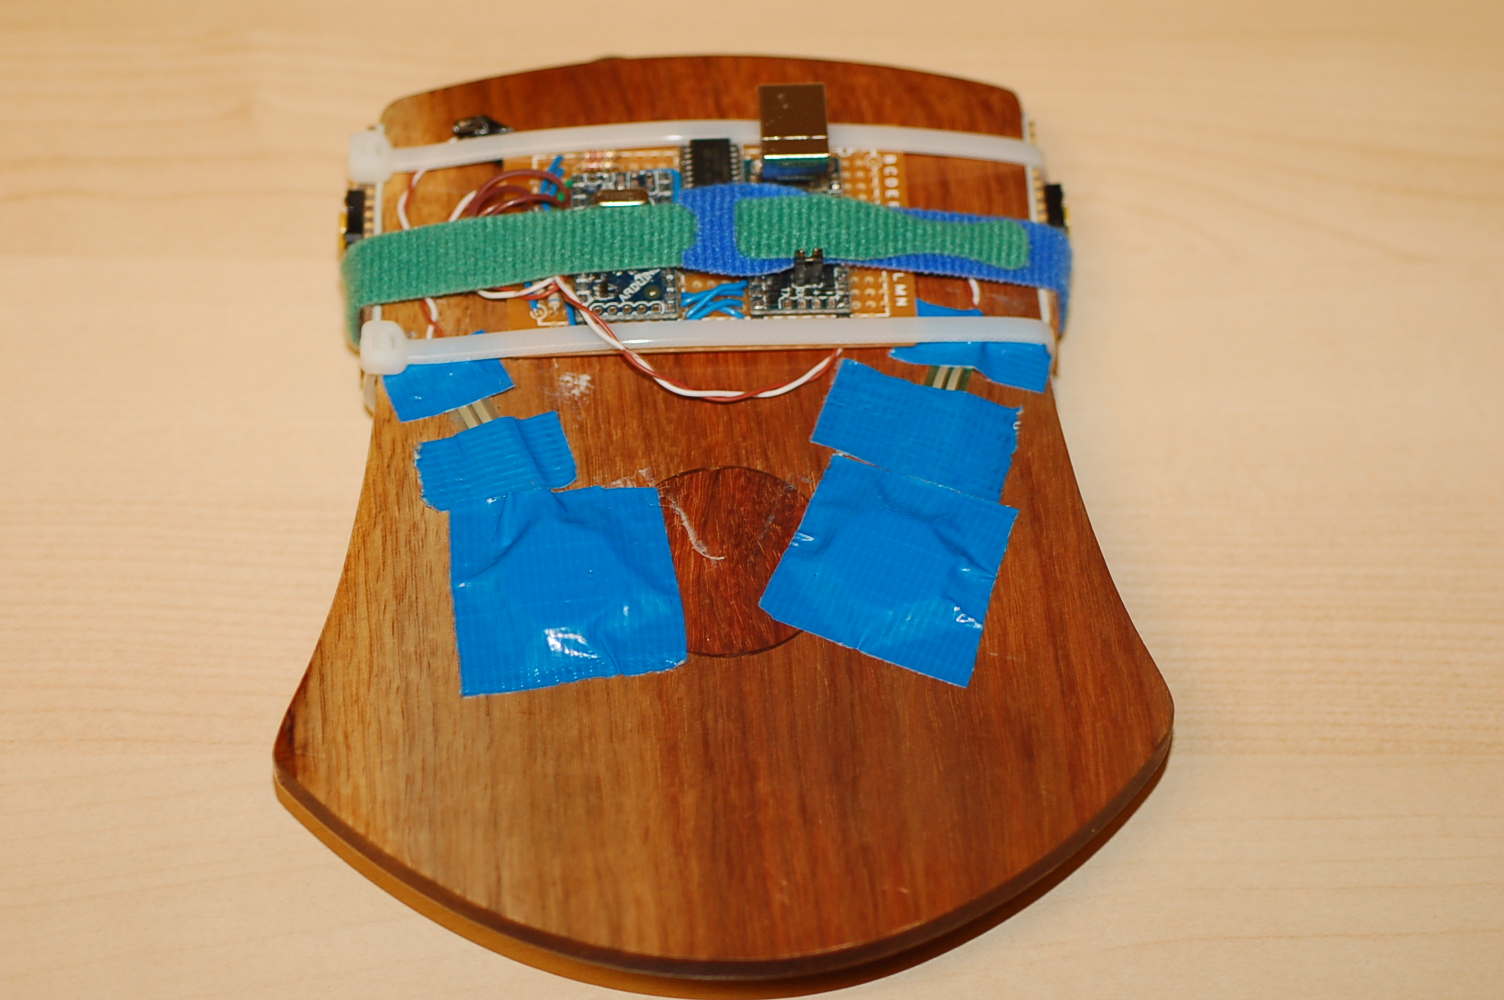 The bottom of the Hyper-Kalimba, showing the electronics.